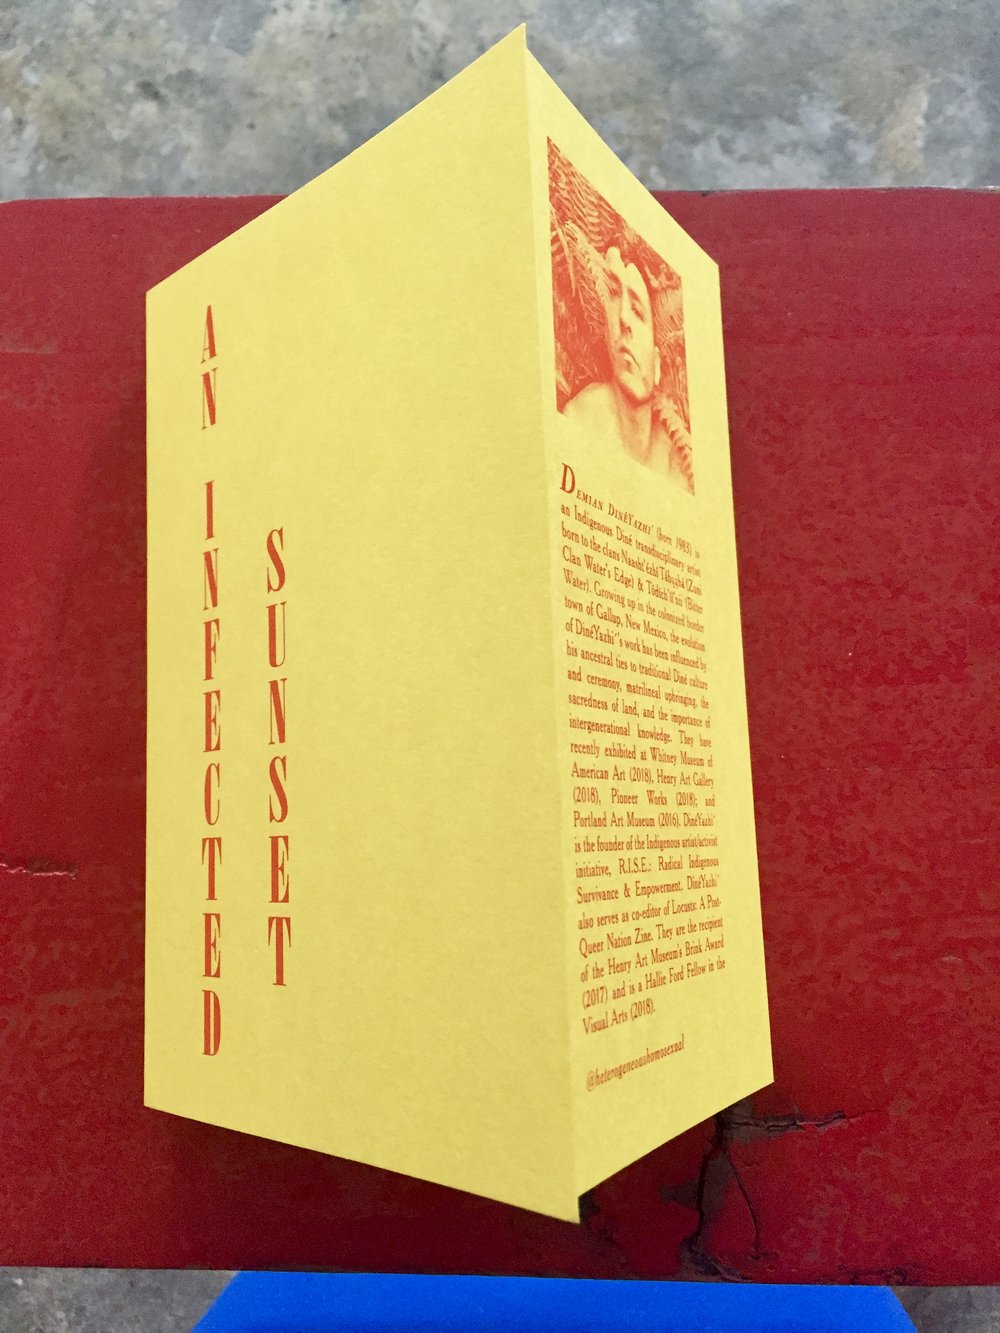  This lovely handmade edition of An Infected Sunset by local writer and artist Demian DinéYazhi´ was donated by John Akira Harrold, the designer who printed and hand-bound the books. 